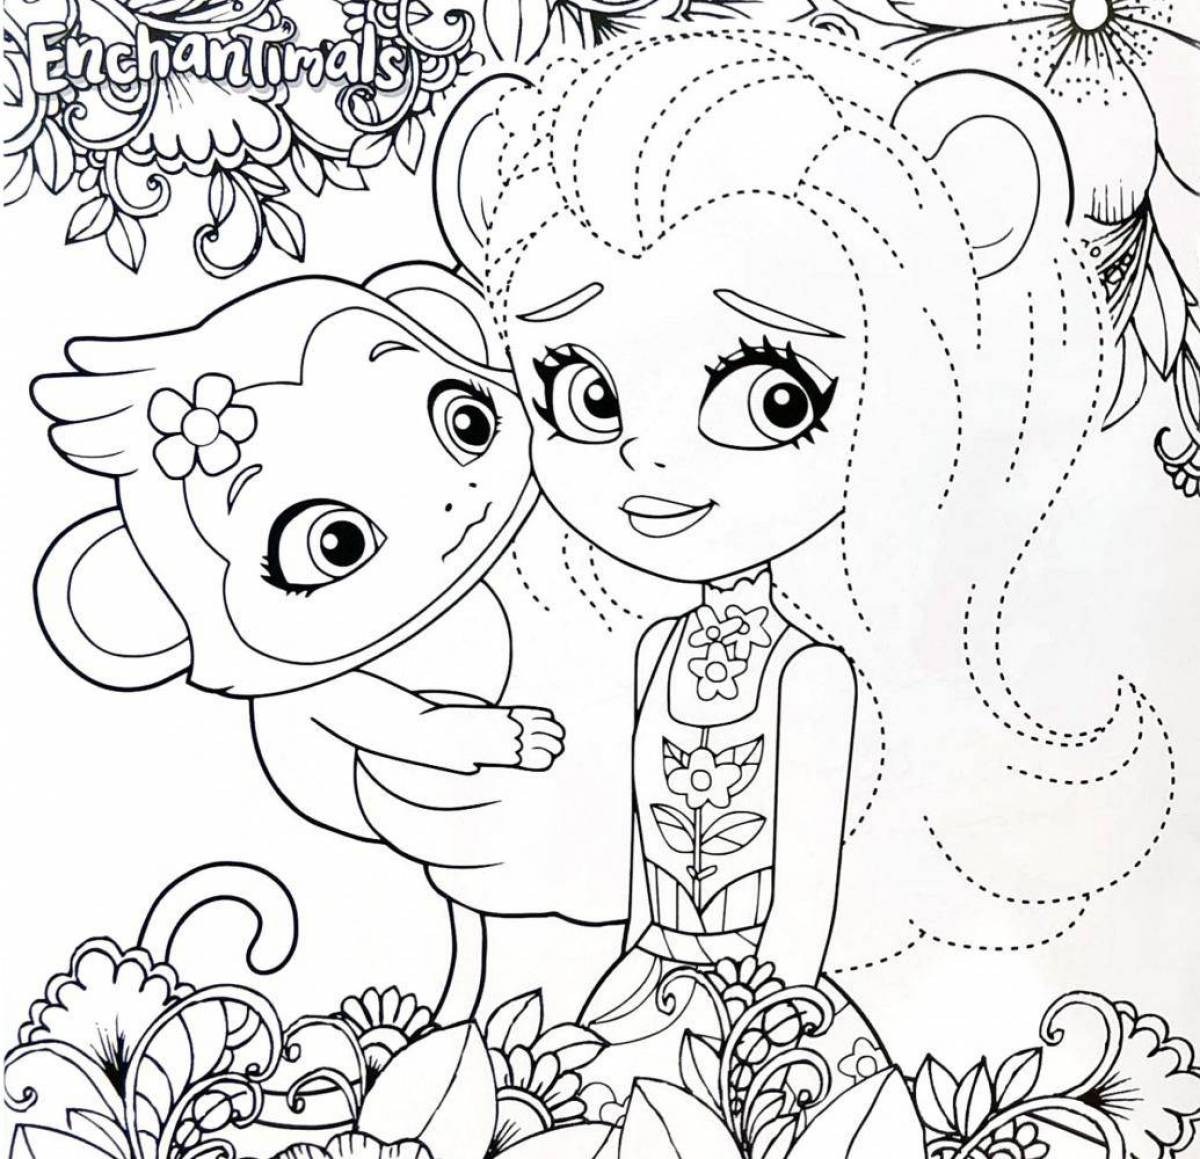 Amazing enchantimals coloring pages for kids